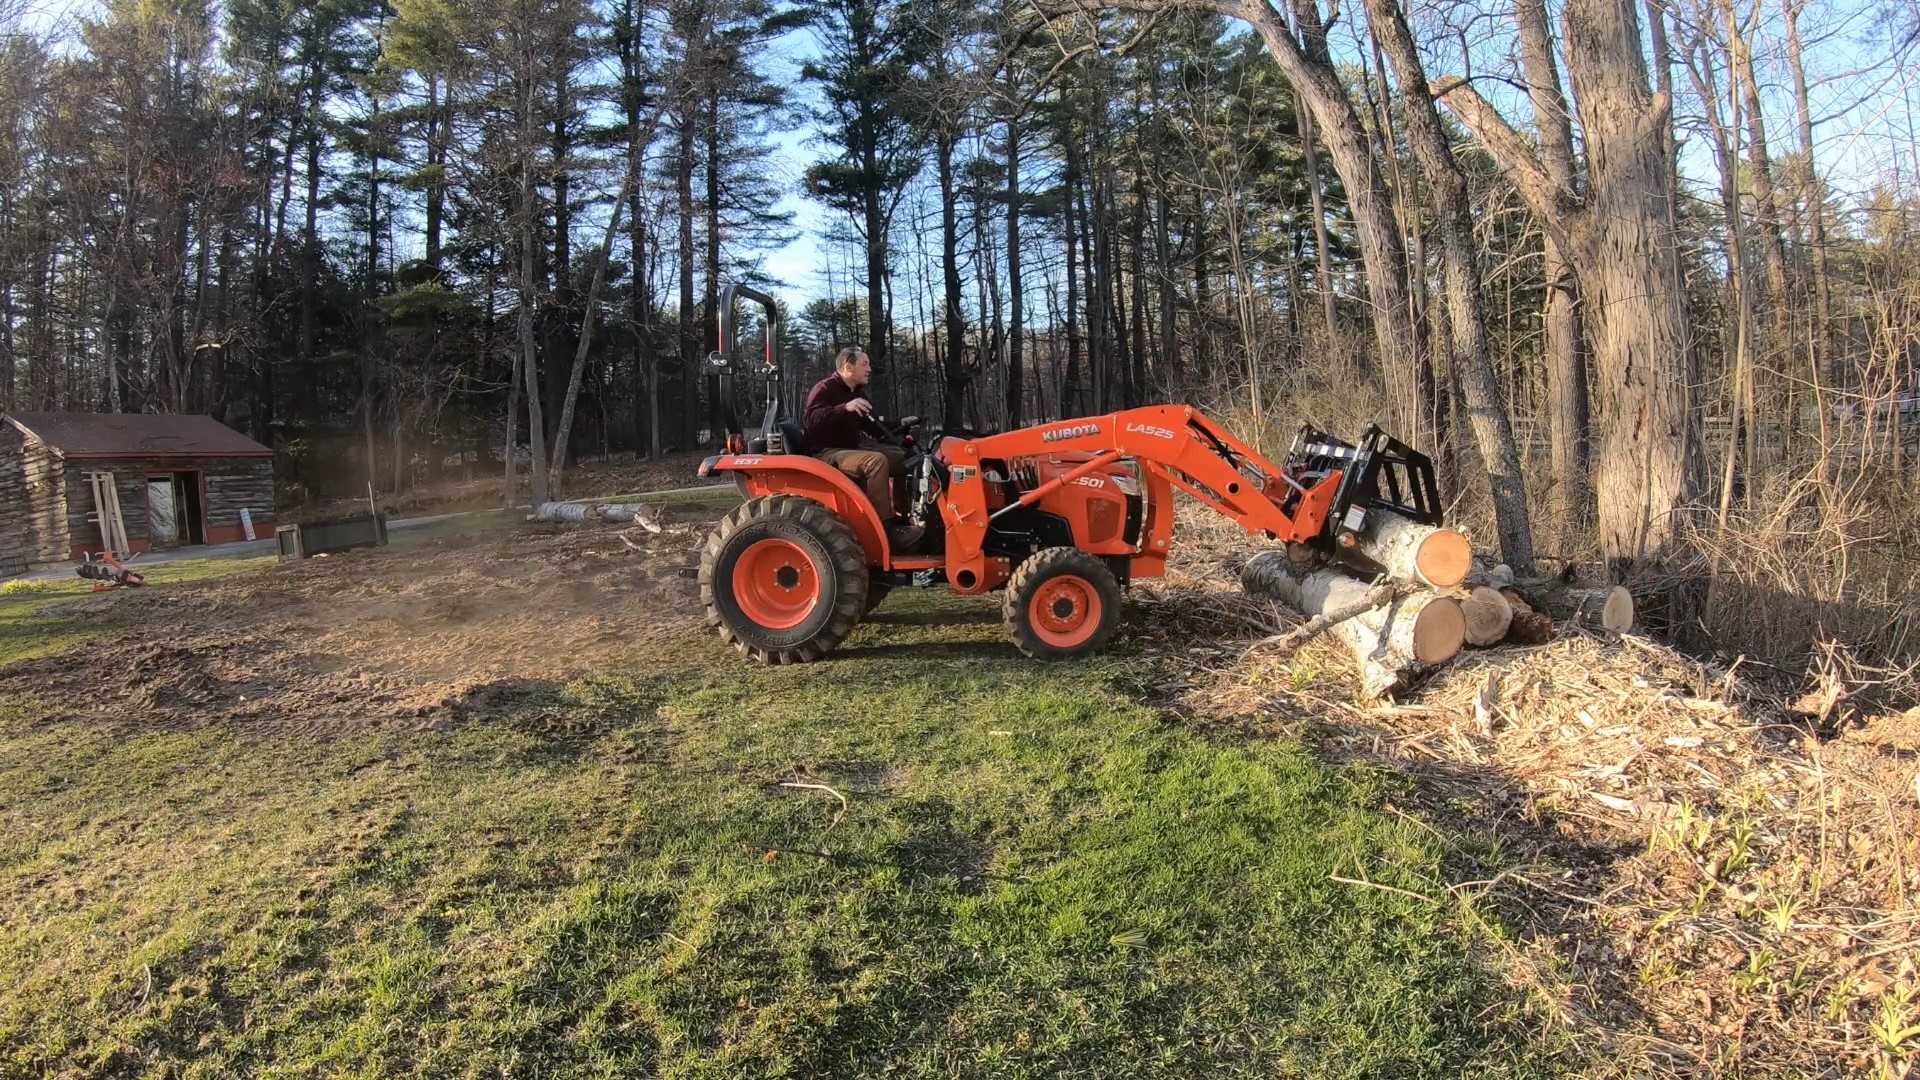 Kubota L2501 Compact Tractor Using a Grapple and Chipper to Remove and Clean Up Brush